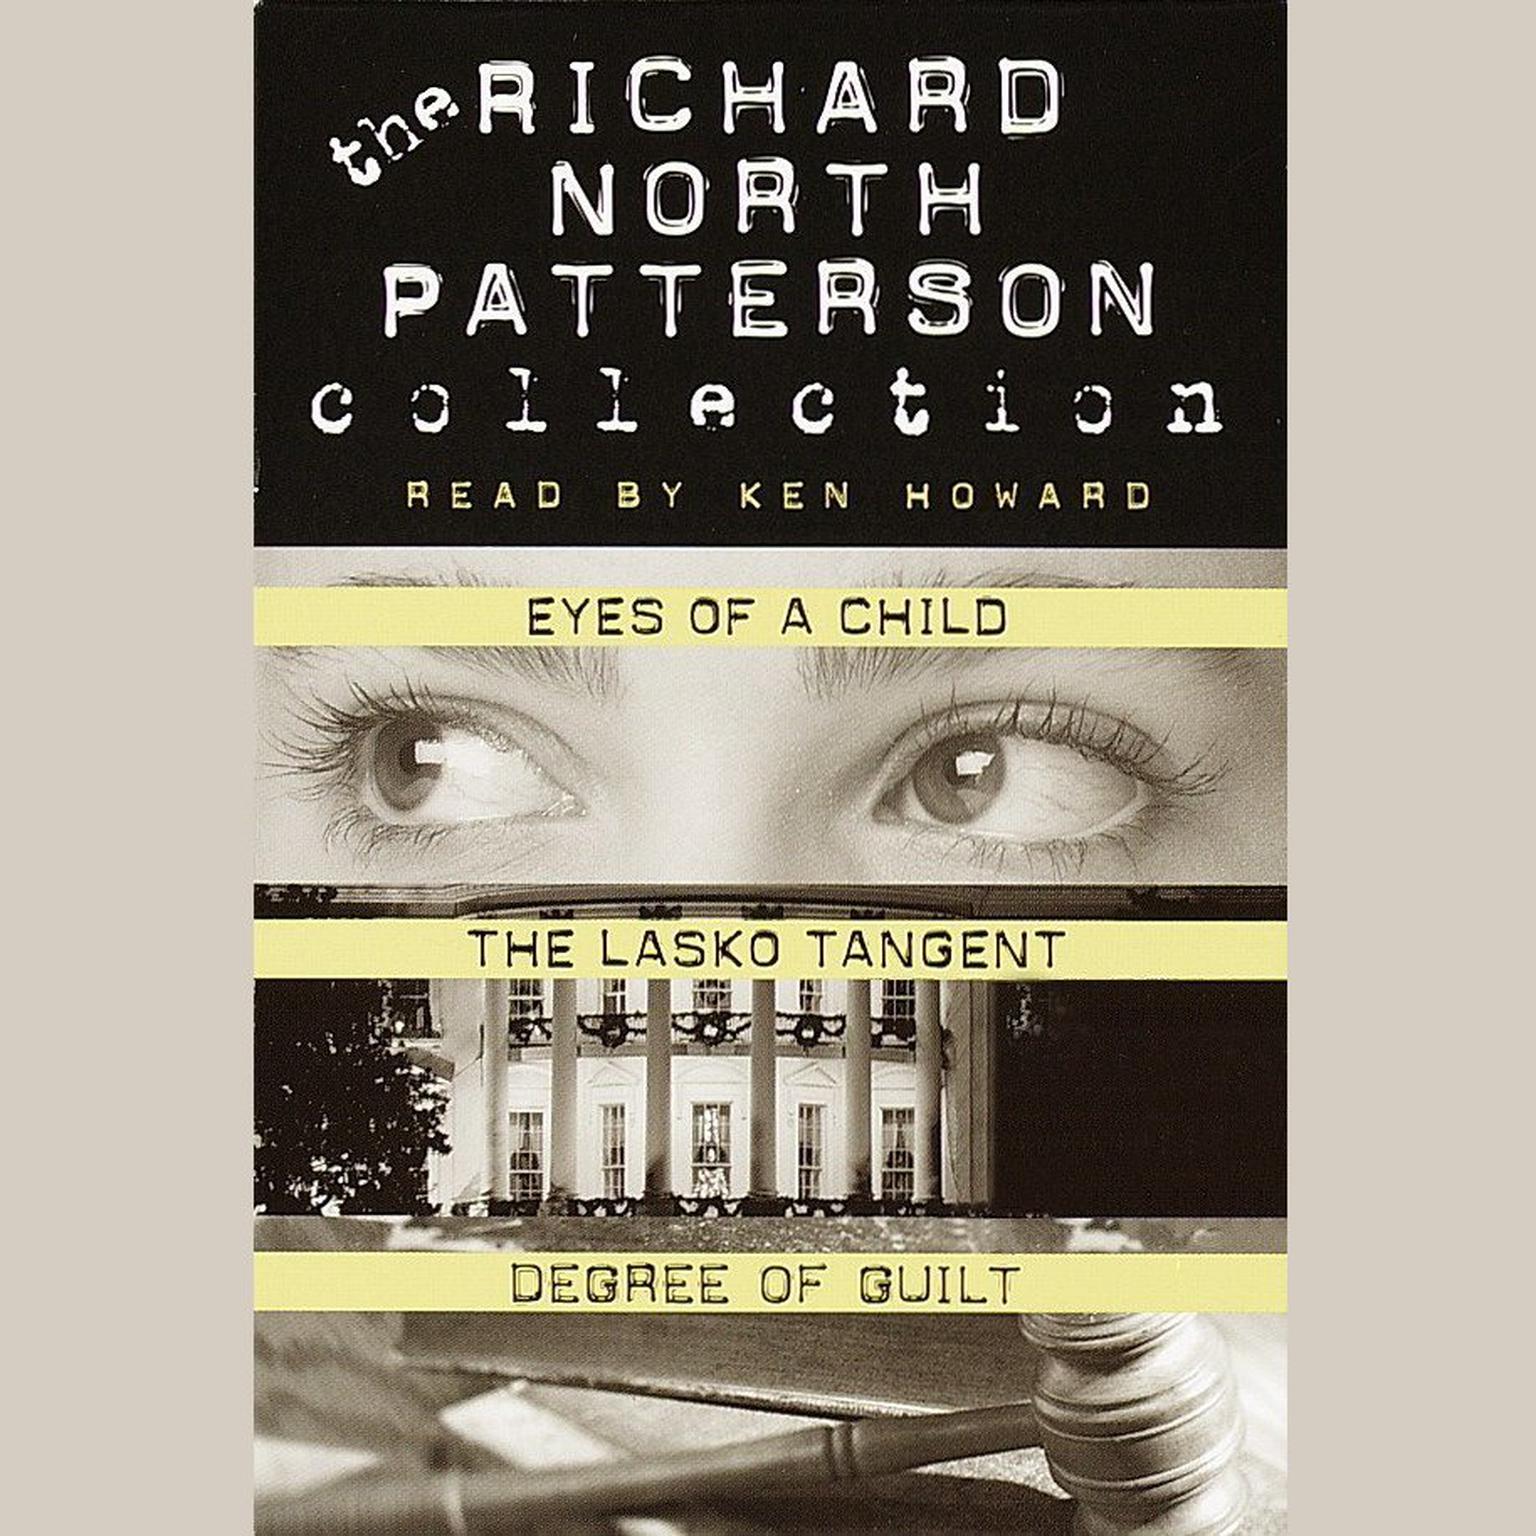 Richard North Patterson Value Collection (Abridged): Eyes of a Child, The Lasko Tangent, and Degree of Guilt Audiobook, by Richard North Patterson